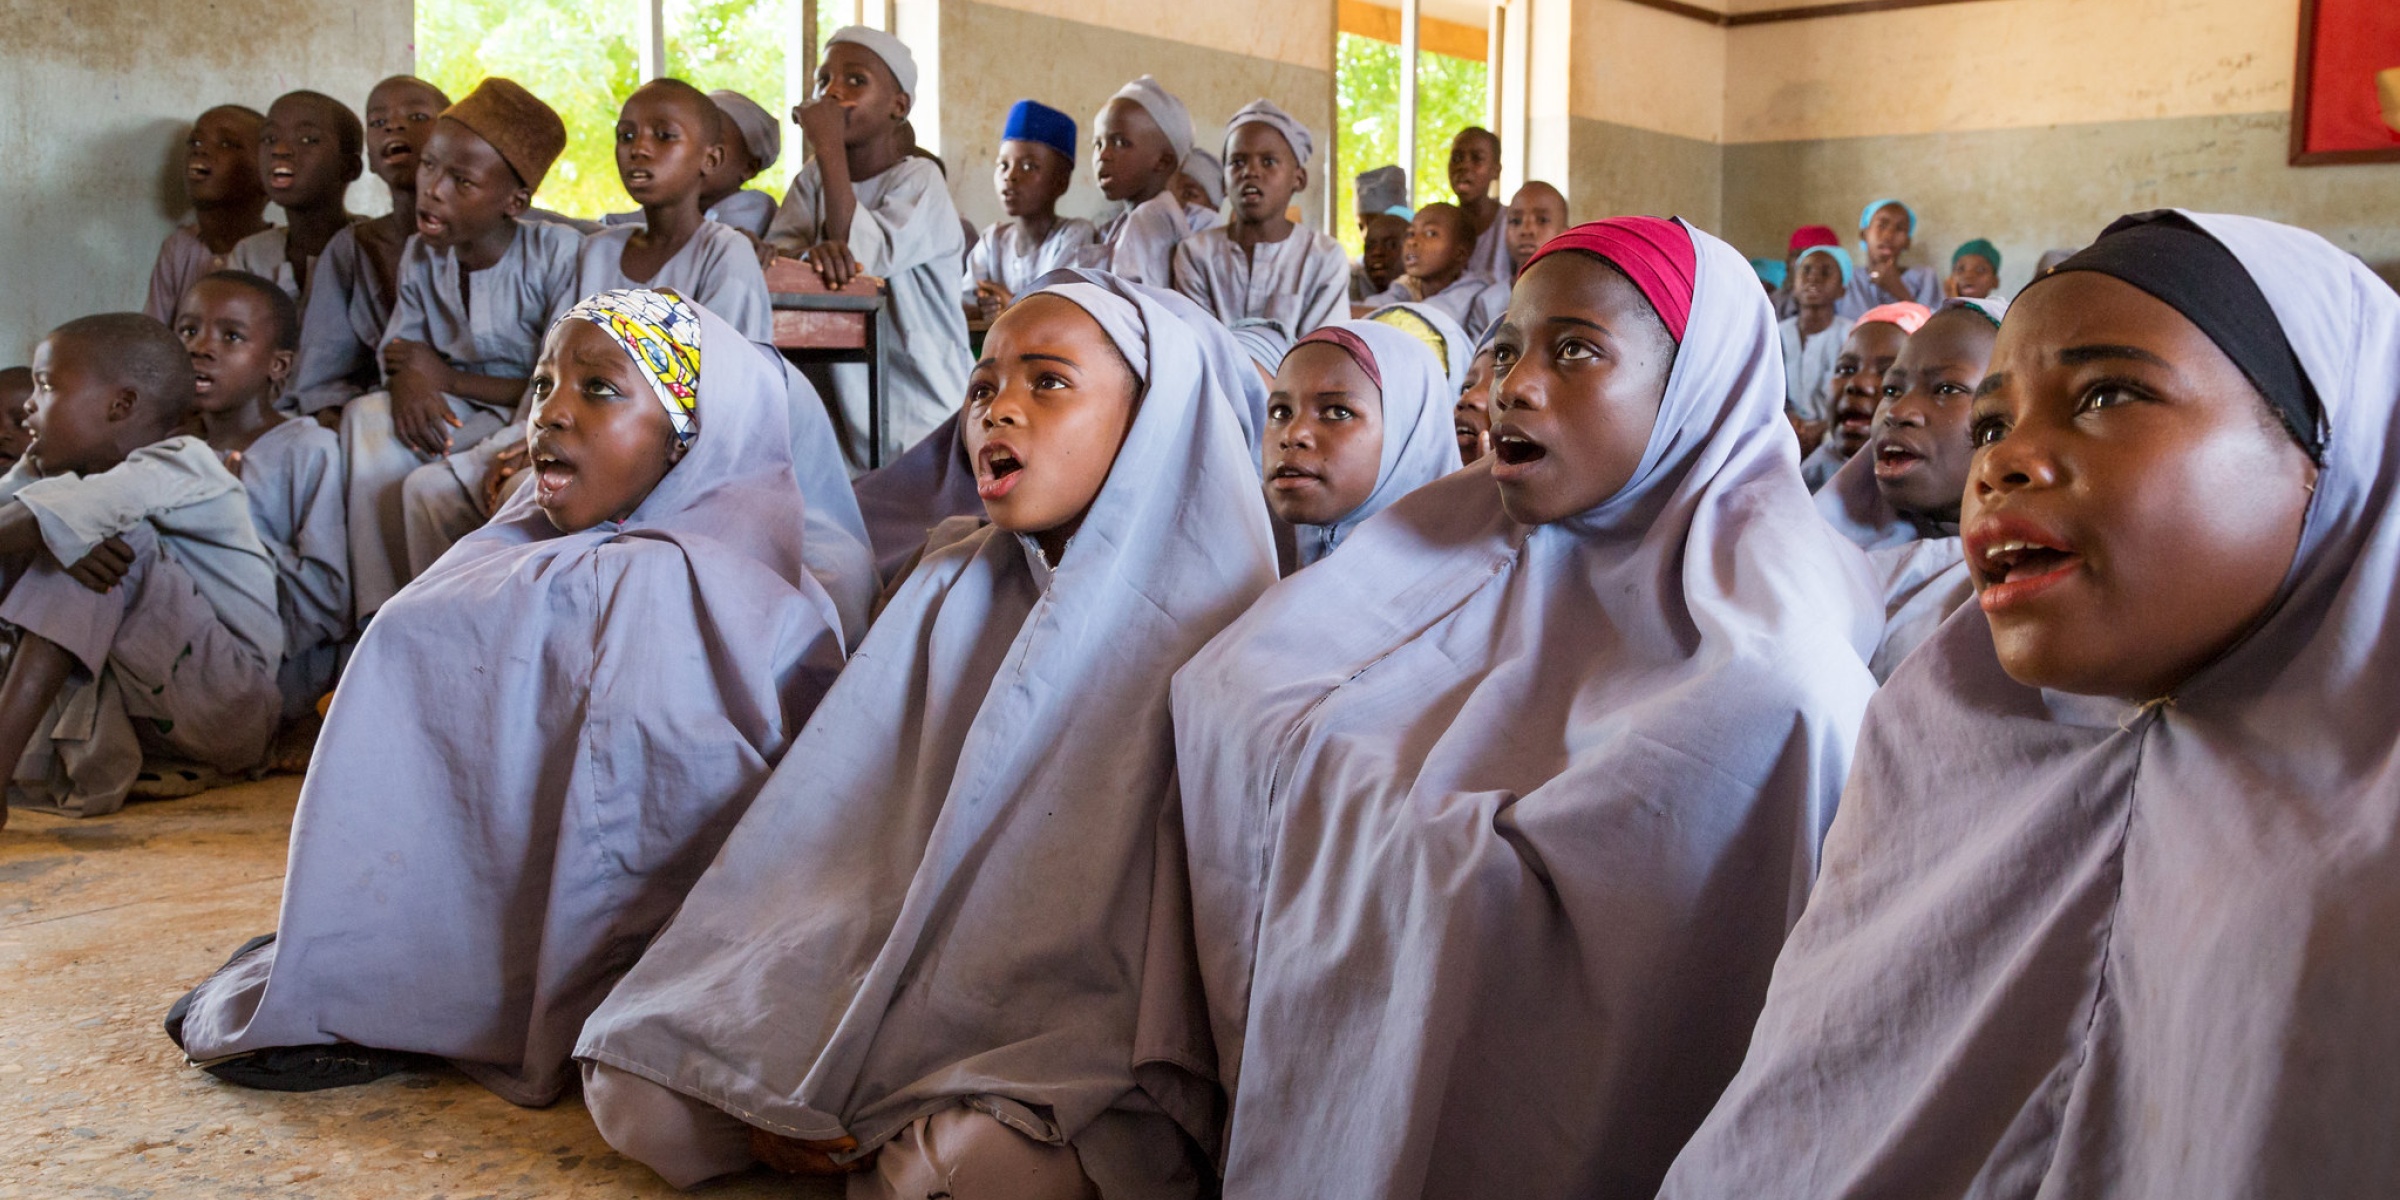 Sumayya Ado, 13 (second from right), and other girls sit on the floor at Janbulo Islamiyya Primary School, Roni, Jigawa State, Nigeria.  Asked if she could change one thing about the school, she says, “I would add more classrooms. Our classes are too congested.” Credit: GPE/Kelley Lynch